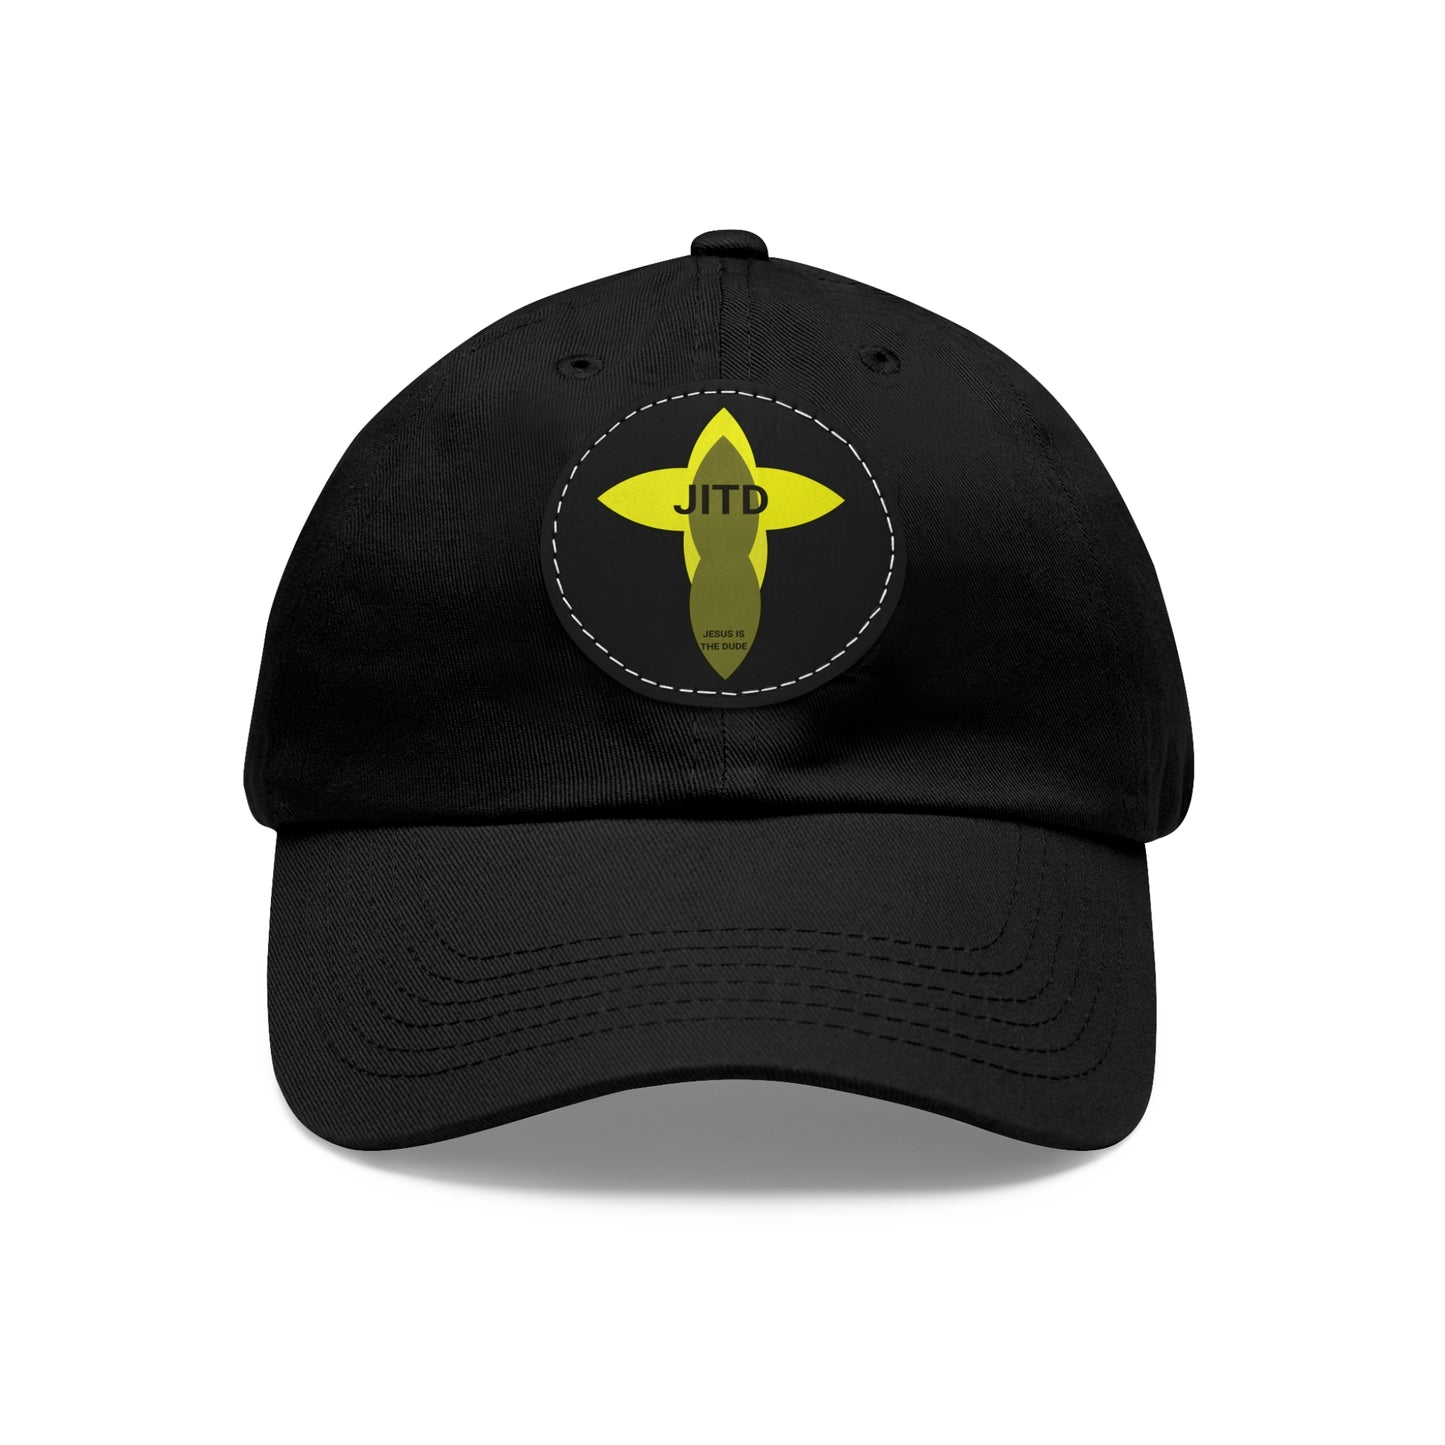 JITD SPEAR CROSS HAT WITH LEATHER PATCH